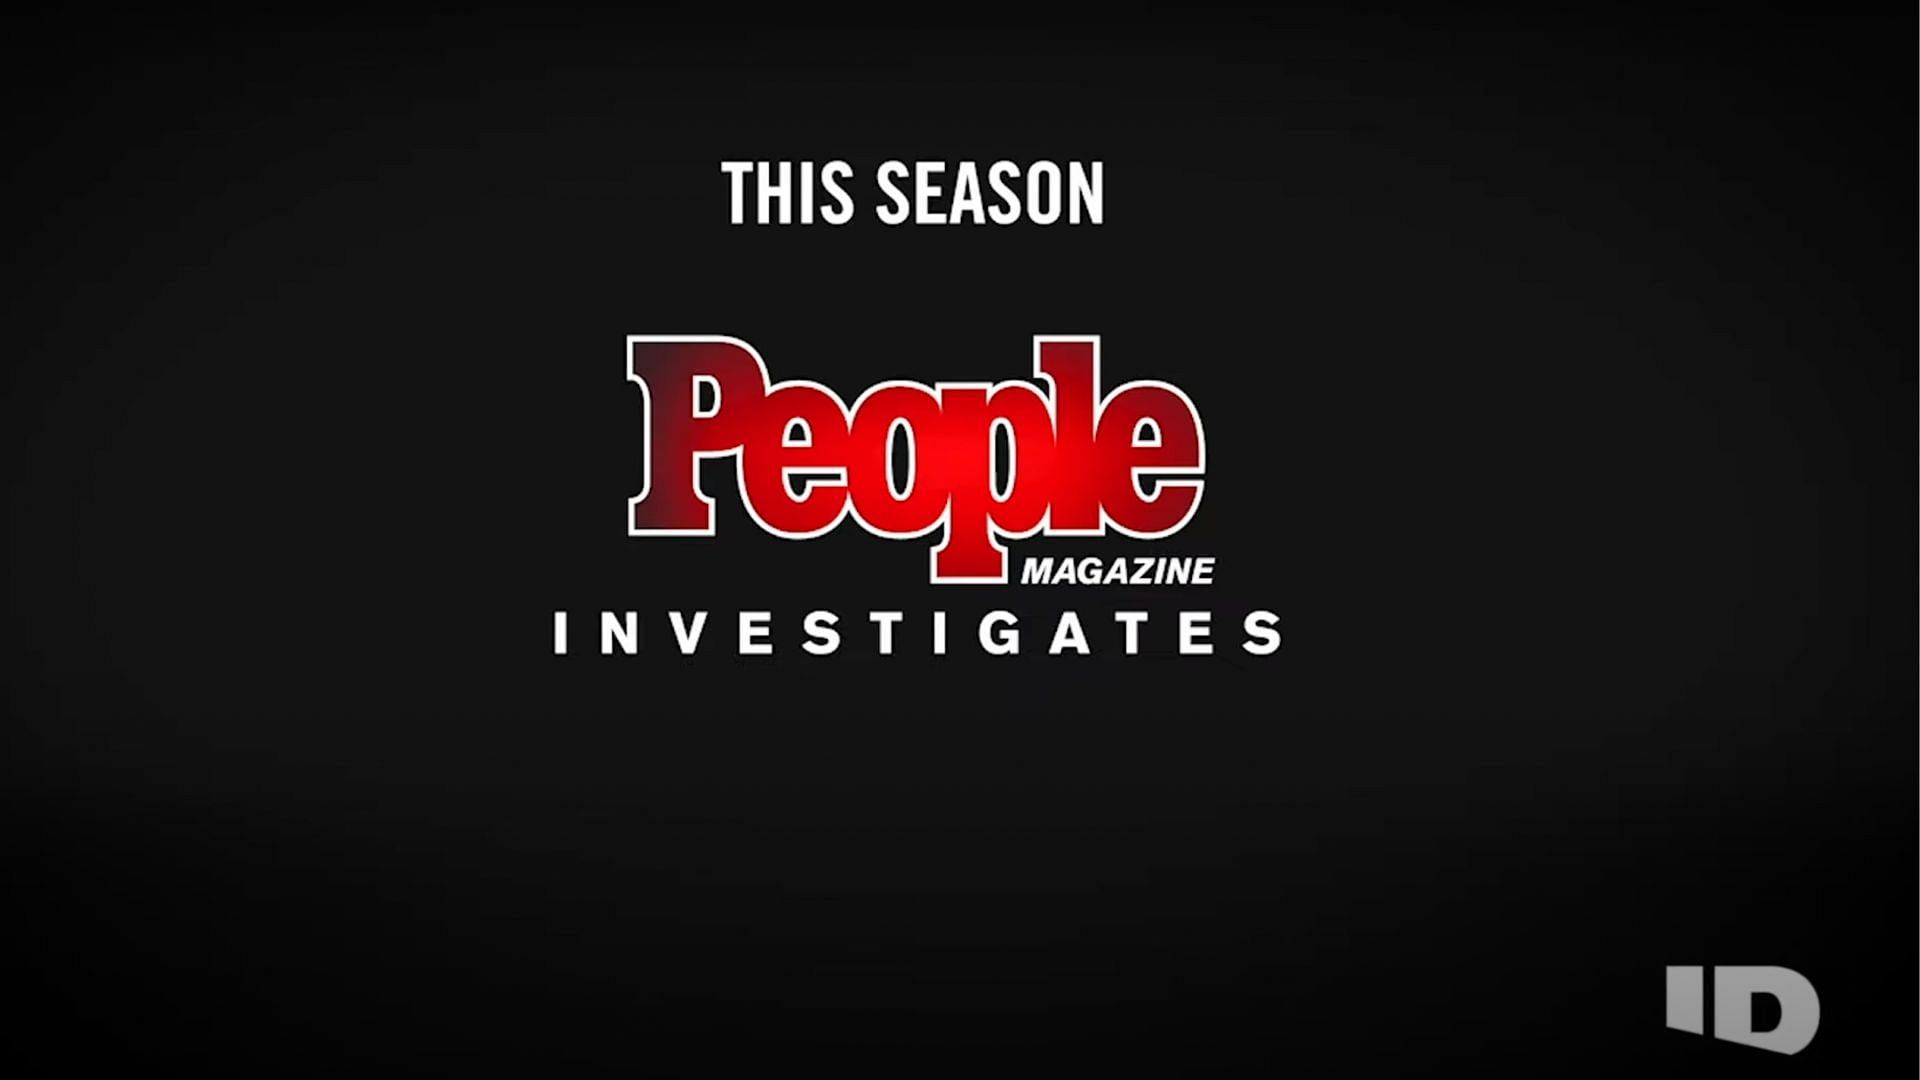 People Magazine Investigates will air its upcoming episode on June 20, 2022 on ID (Image via Investigation Discovery/YouTube)